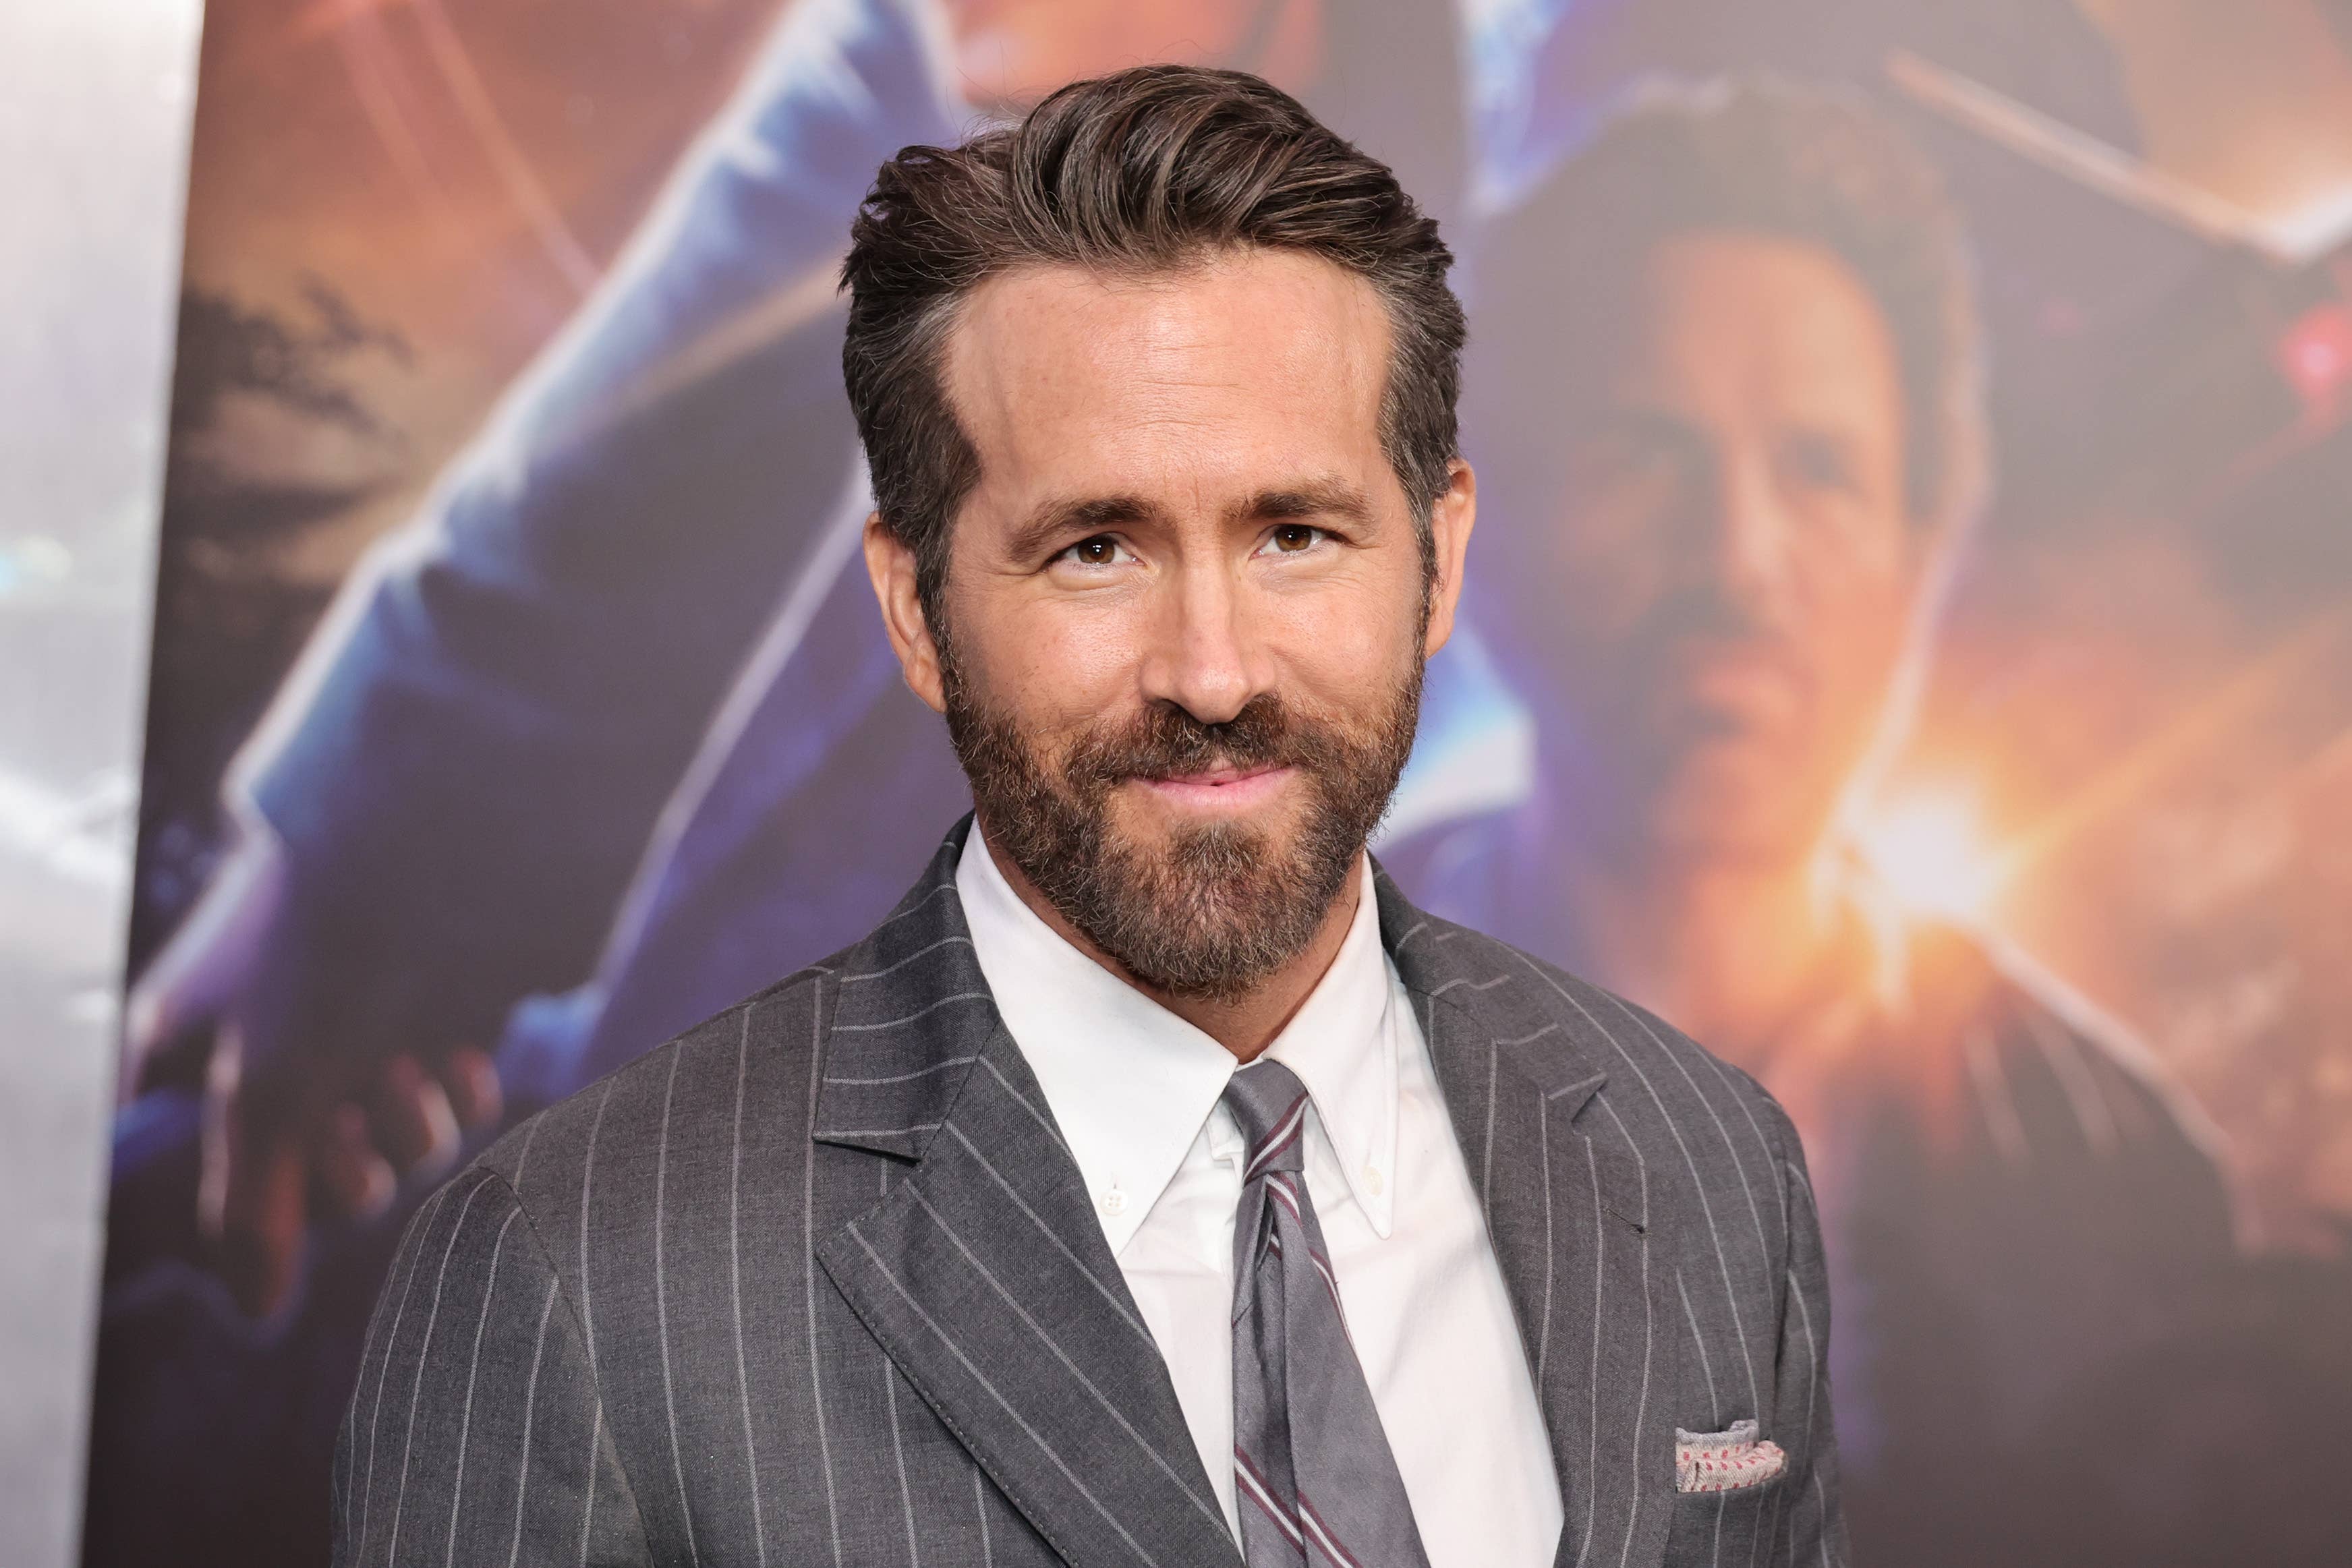 Actor Ryan Reynolds interested in buying the Sens